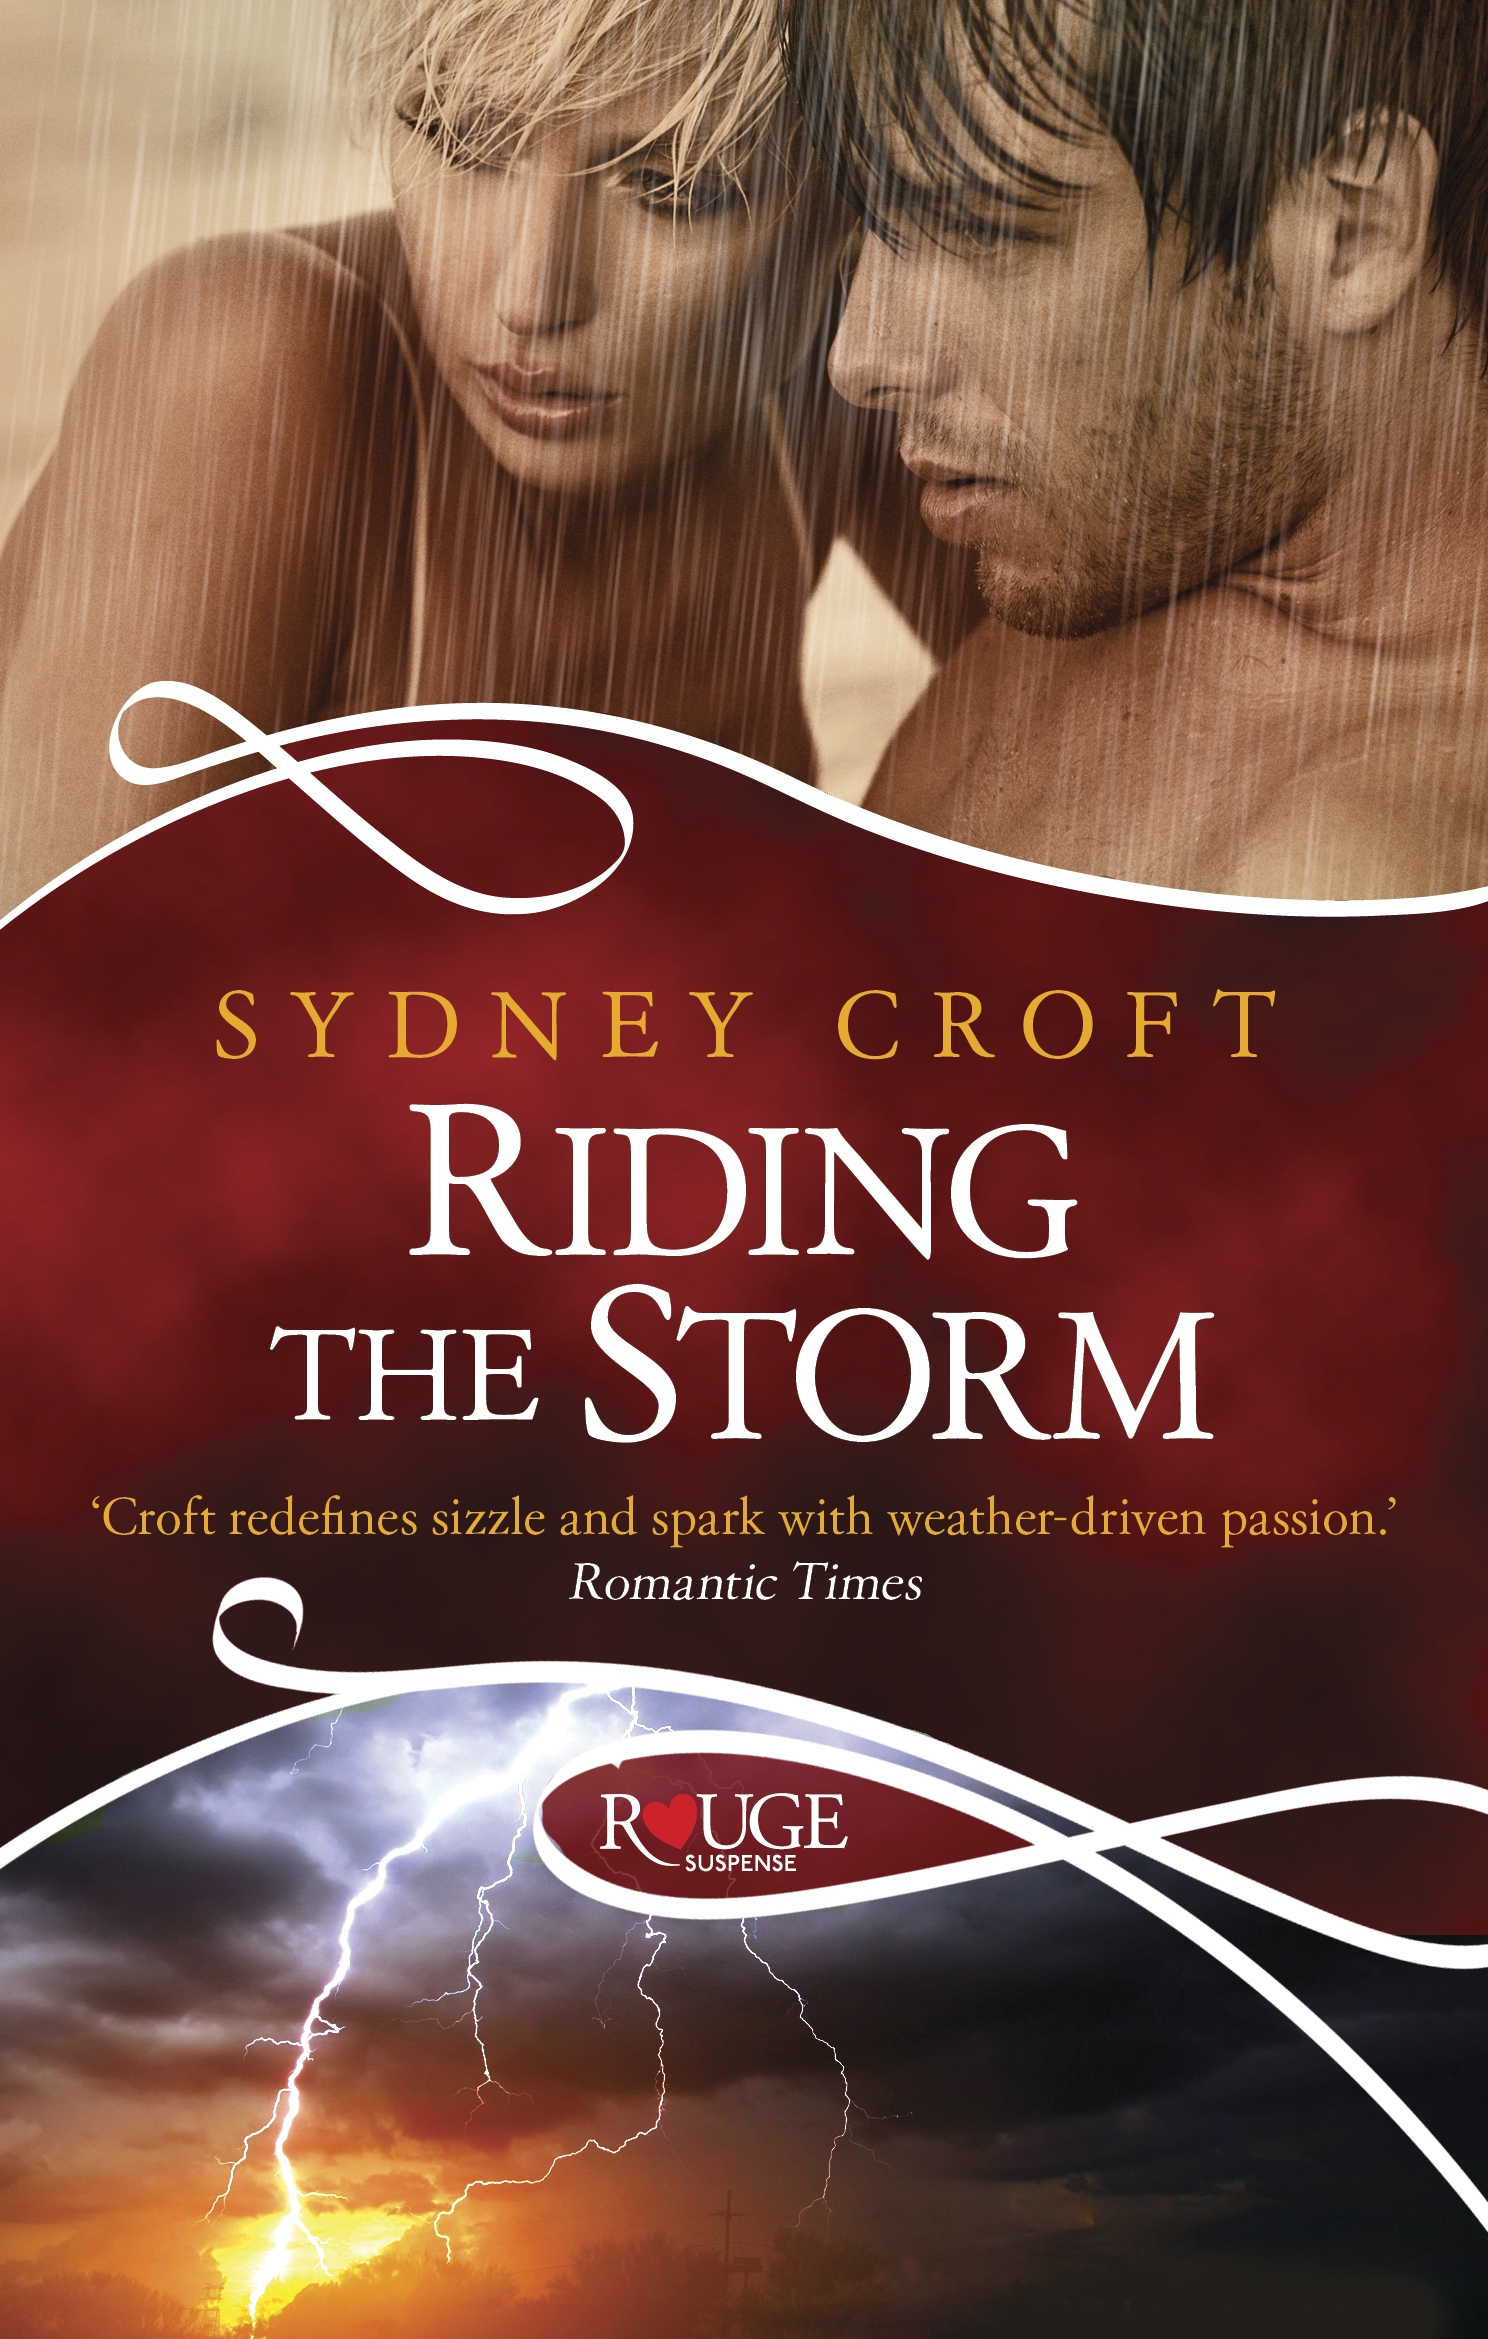 Seduced by the Storm: A Rouge Paranormal Romance